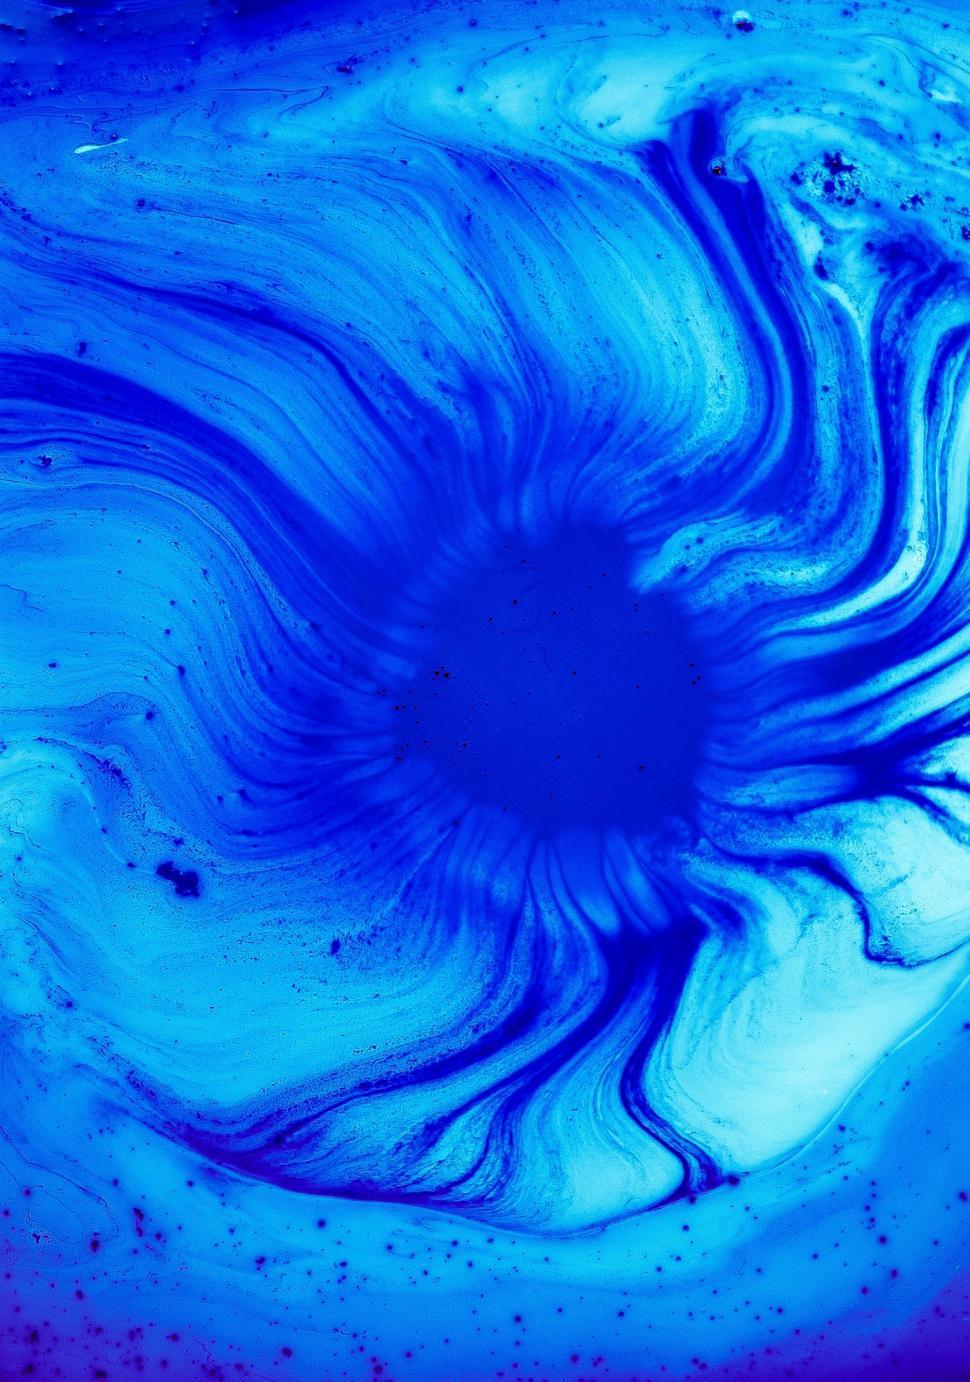 Free Image of Close-Up of Blue and Black Substance 